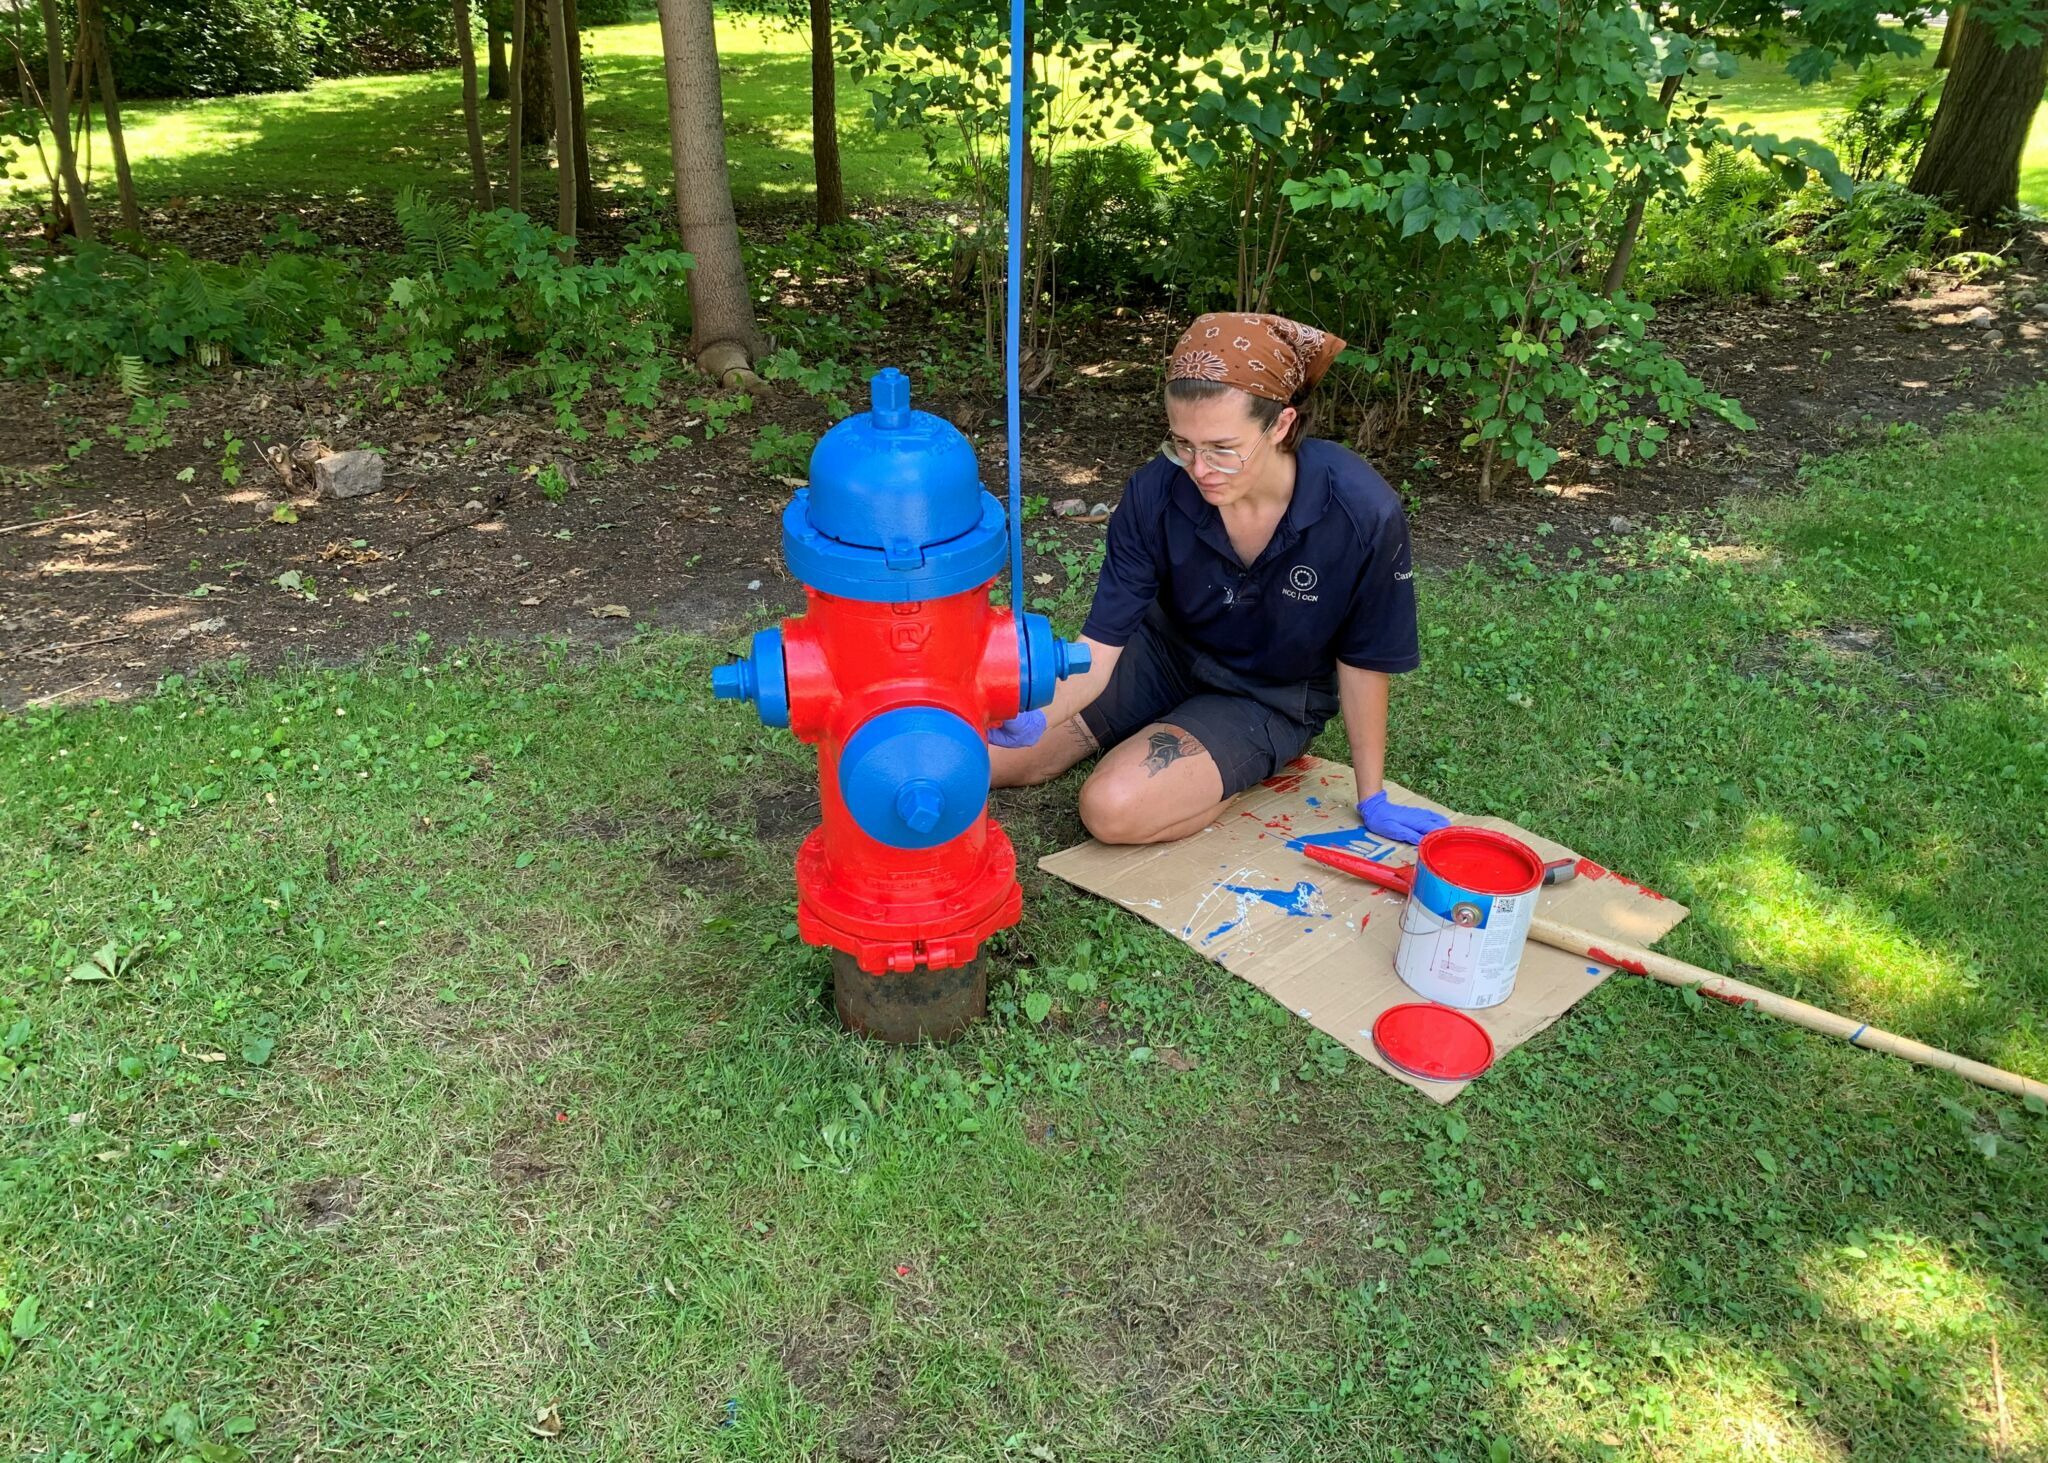 Leo Cox, Rideau Hall grounds student, revitalizing a fire hydrant with paint.